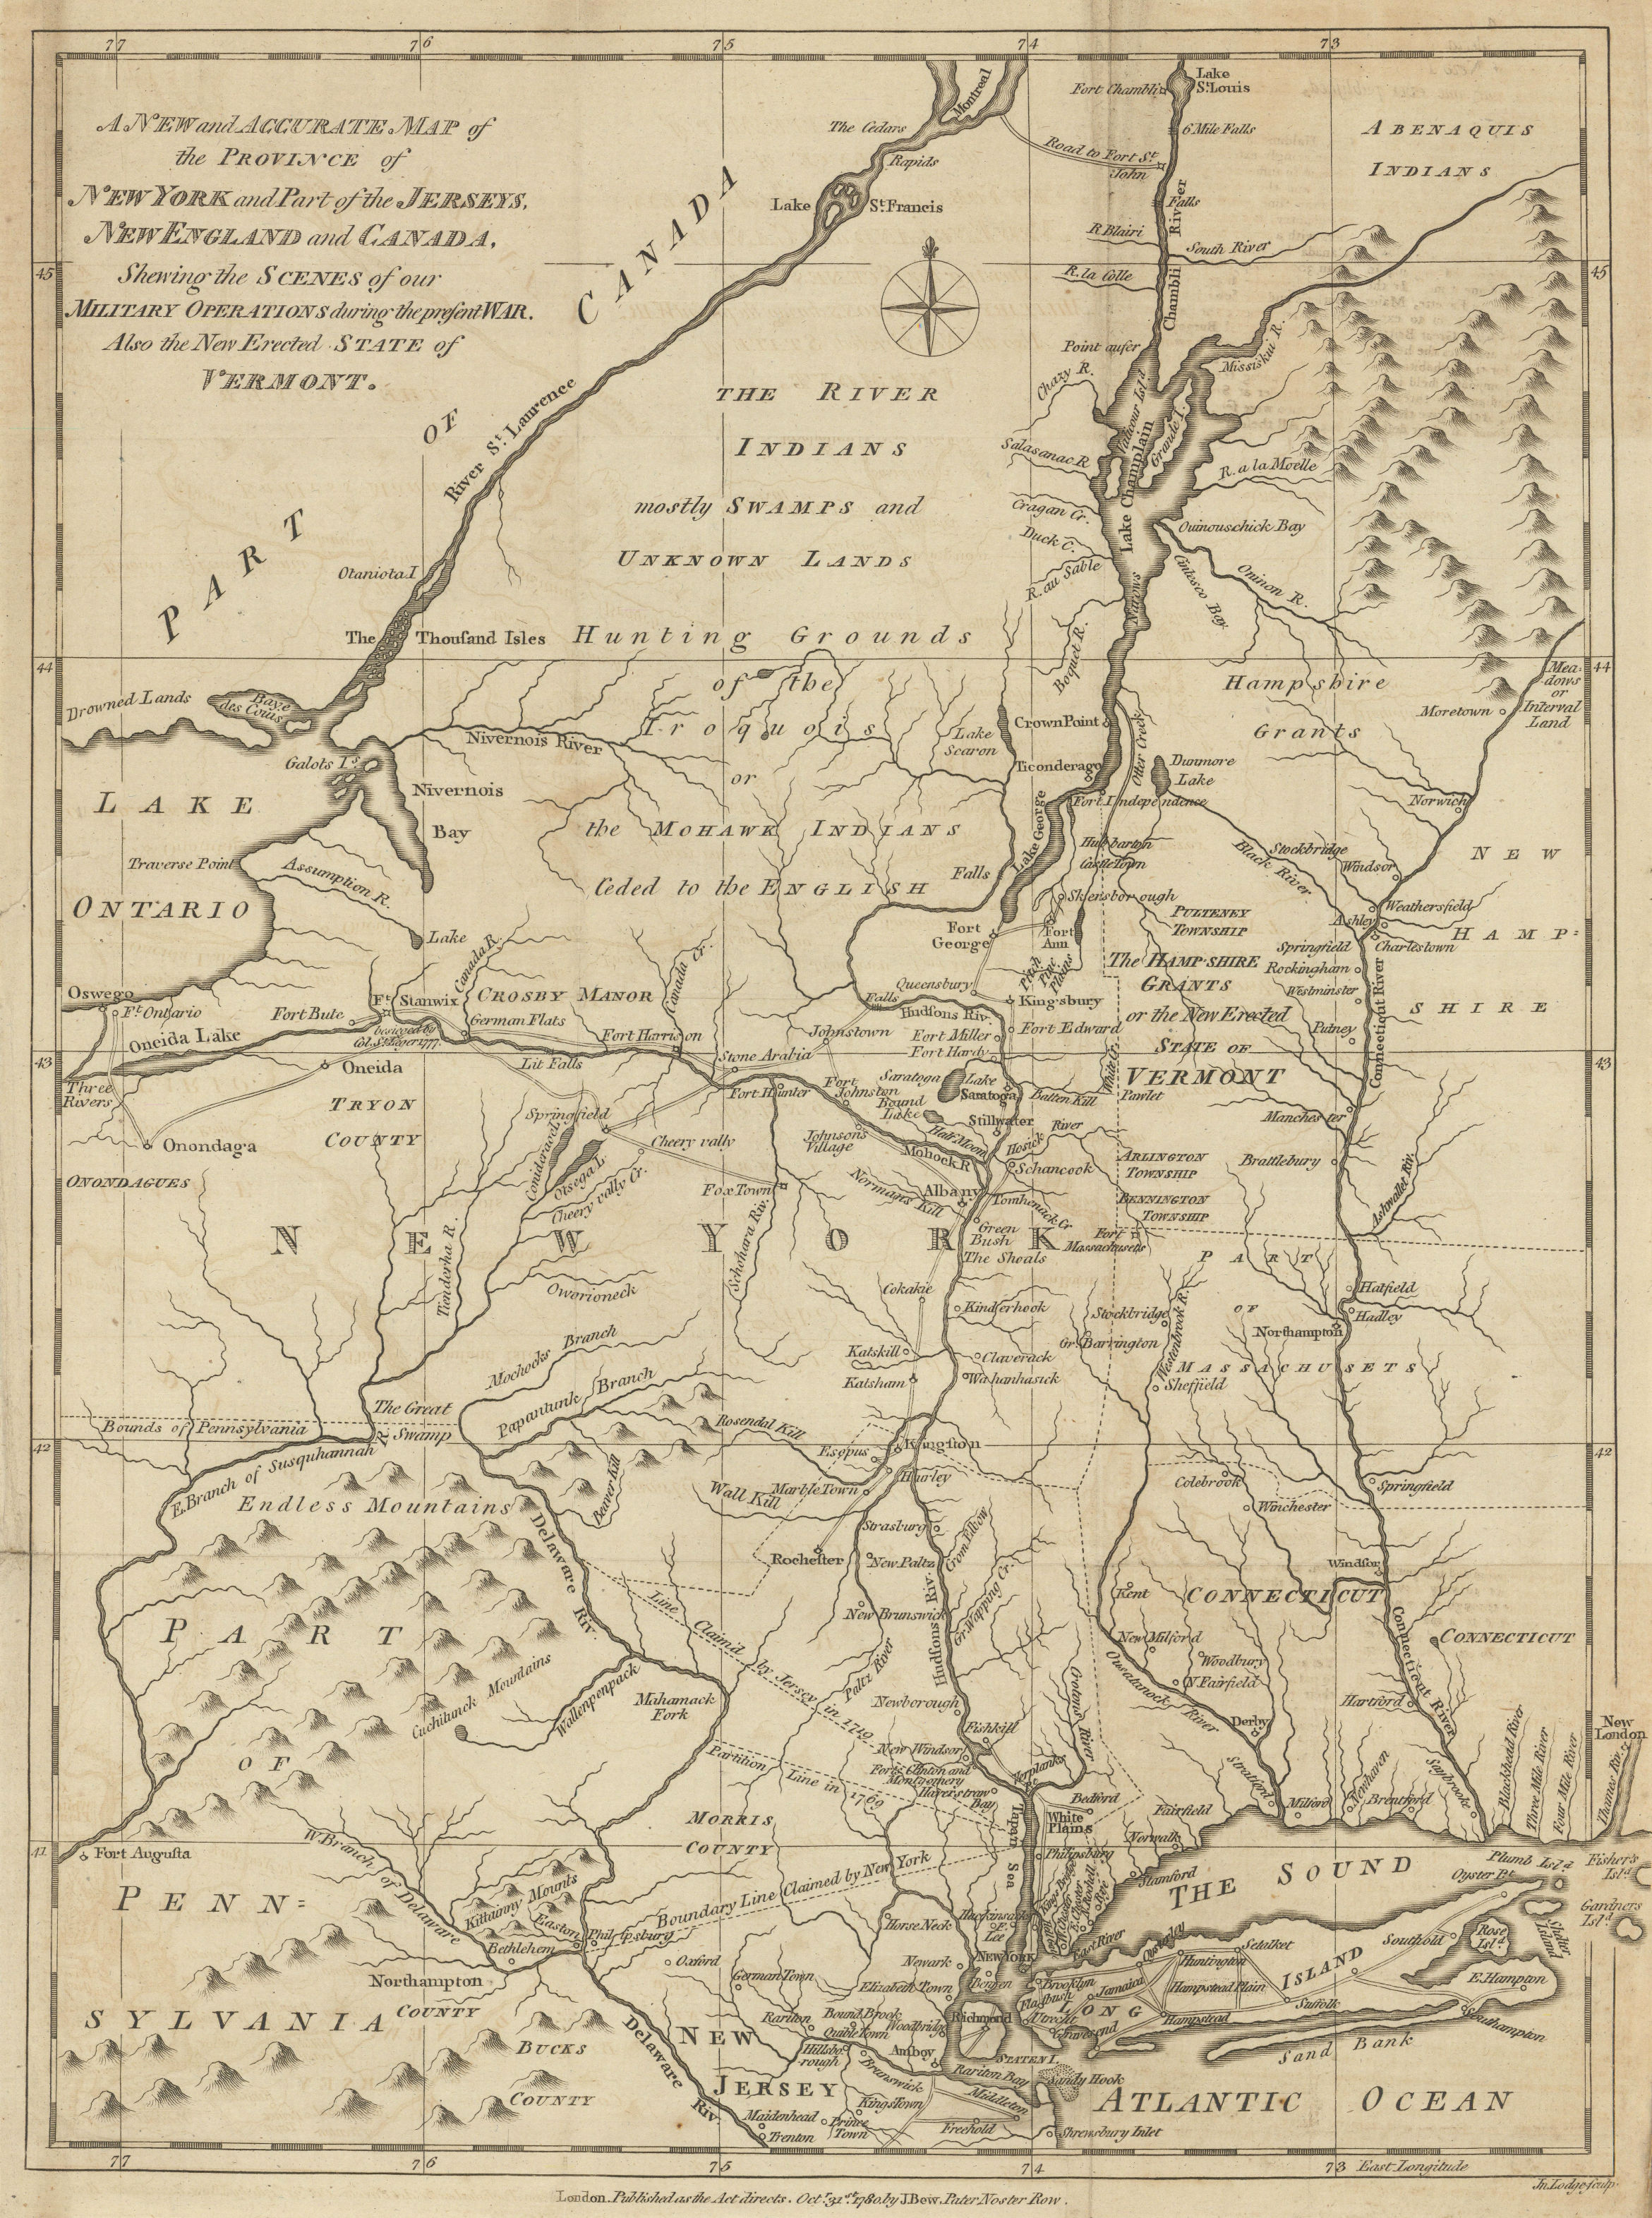 Associate Product The Province of New York & Part of the Jerseys, New England… JOHN LODGE 1780 map